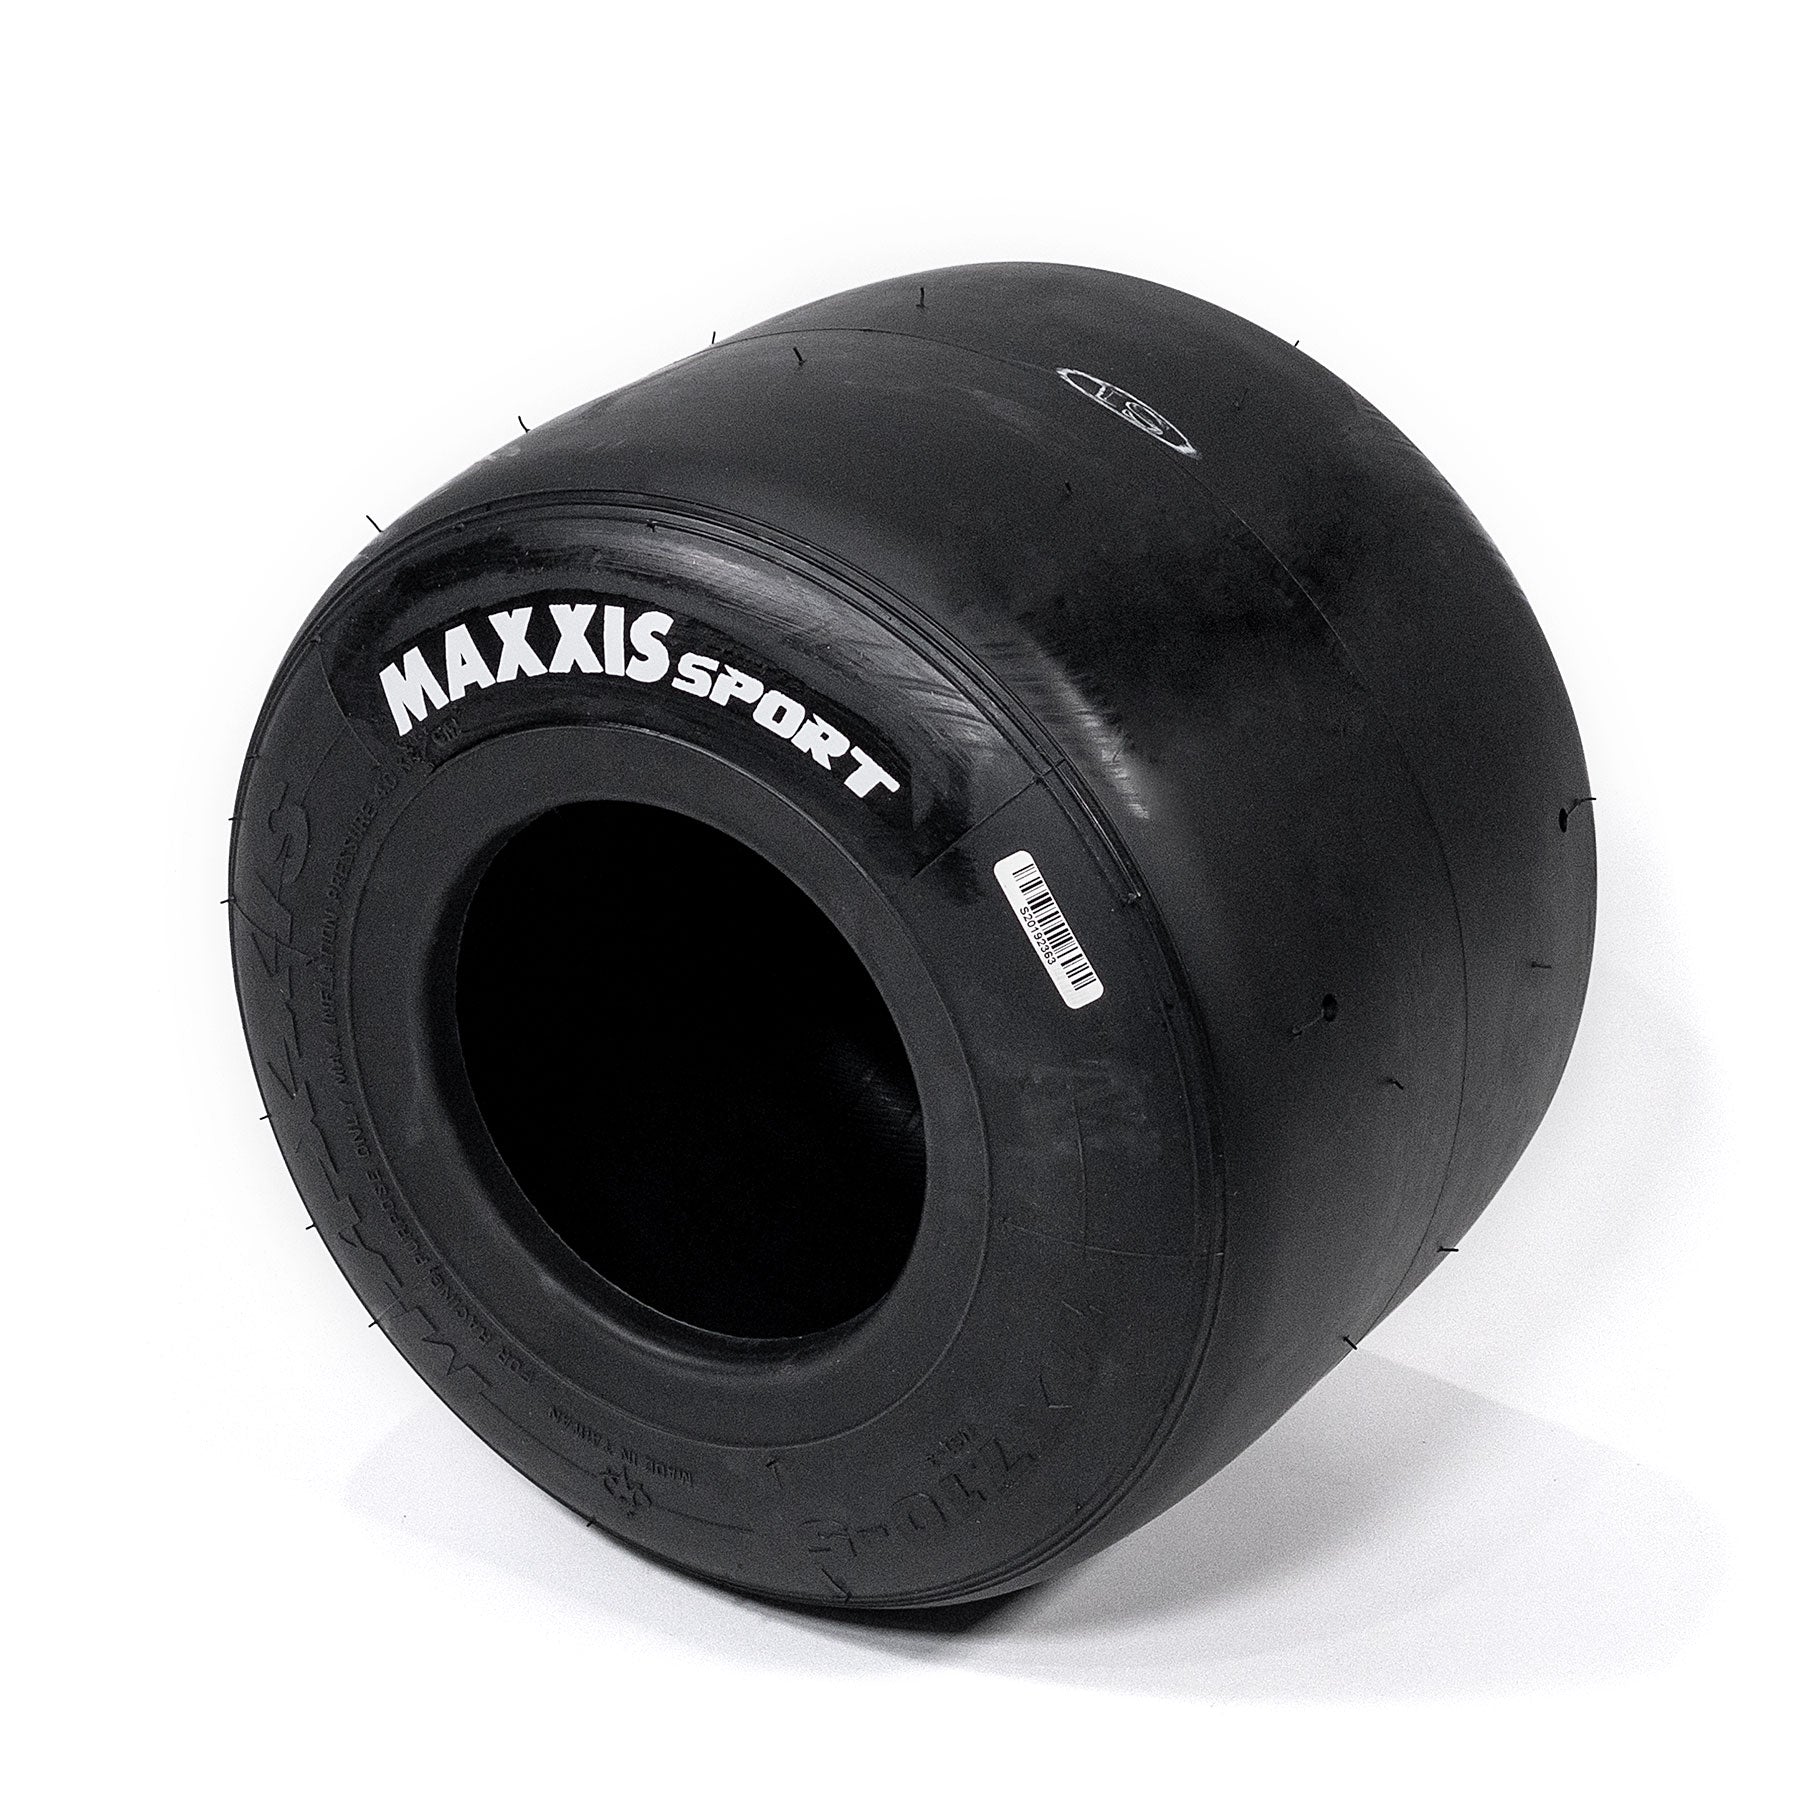 Maxxis Sport rear kart tyre for use in KNSW racing